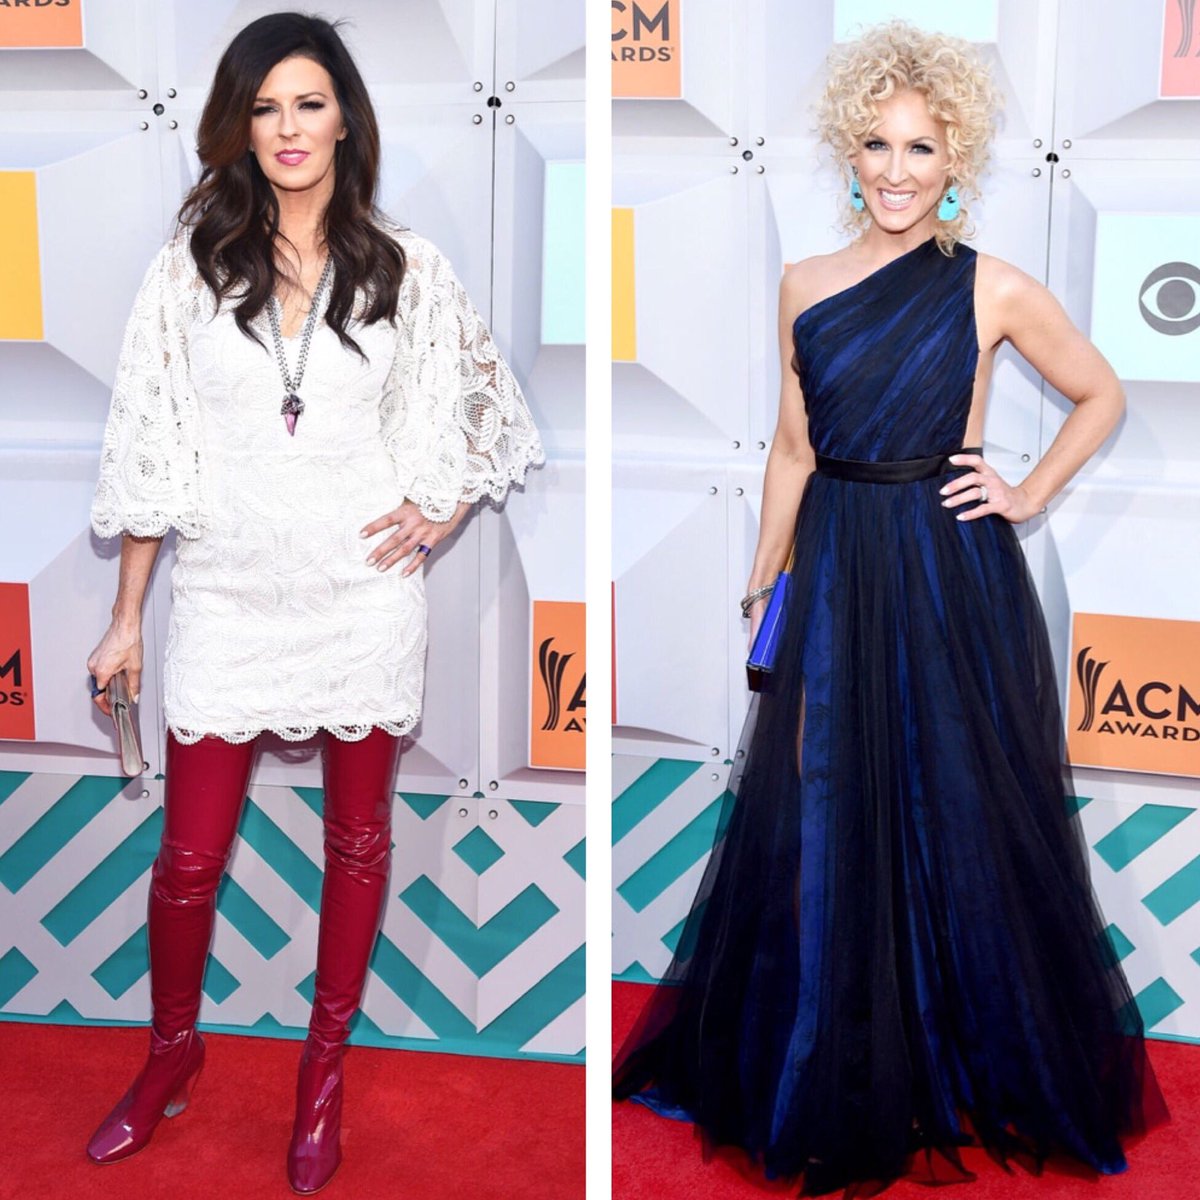 RT @ProjectRunway: The ladies of @littlebigtown know how to wear @AlexanderAPope and @ashaama's designs on the #ACMAwards red carpet! https…